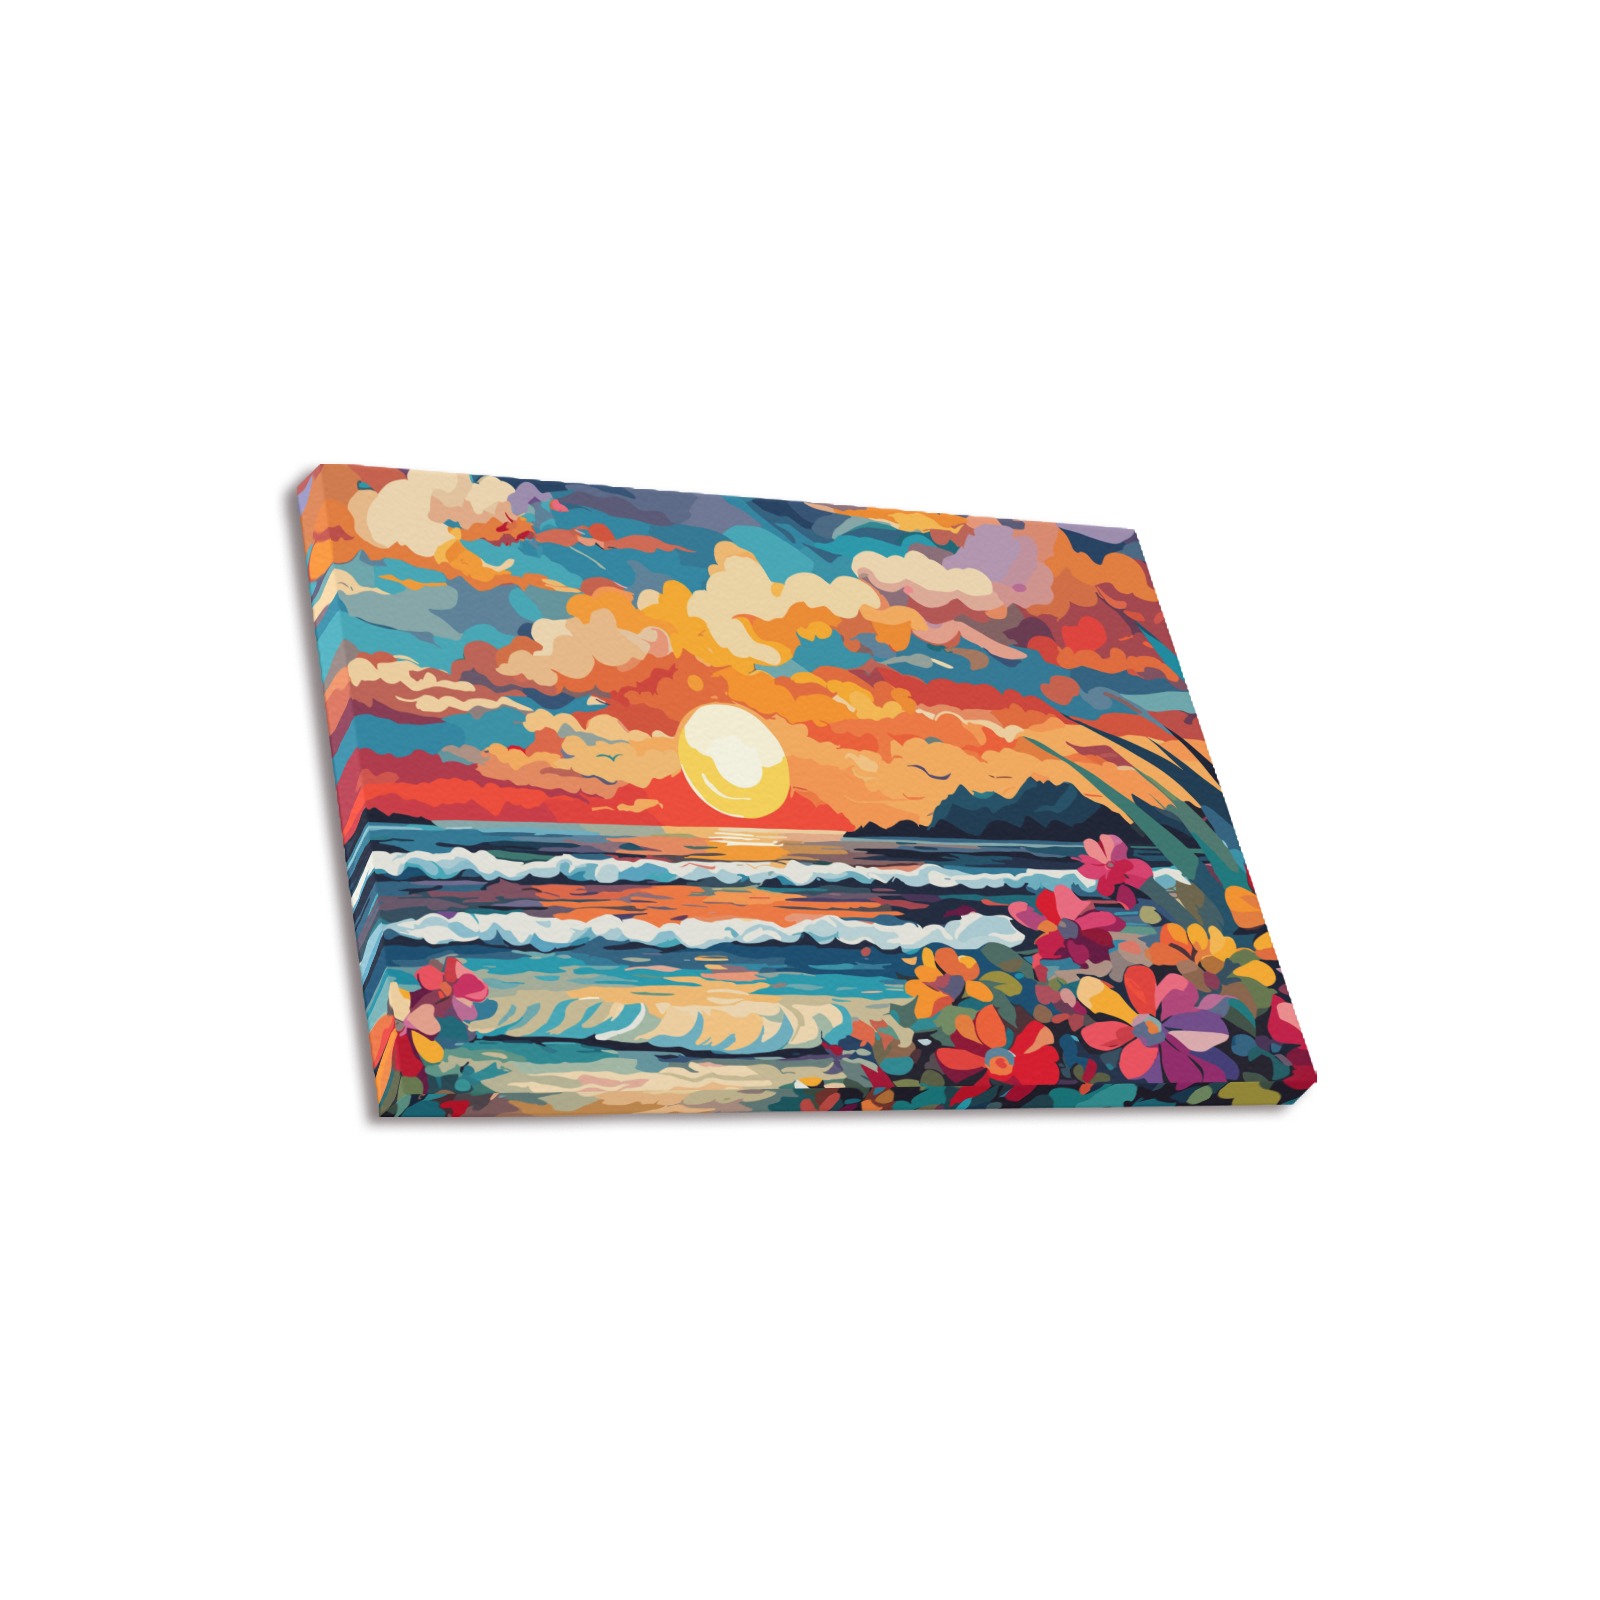 Setting sun, ocean waves, chic tropical flowers. Upgraded Canvas Print 18"x12"